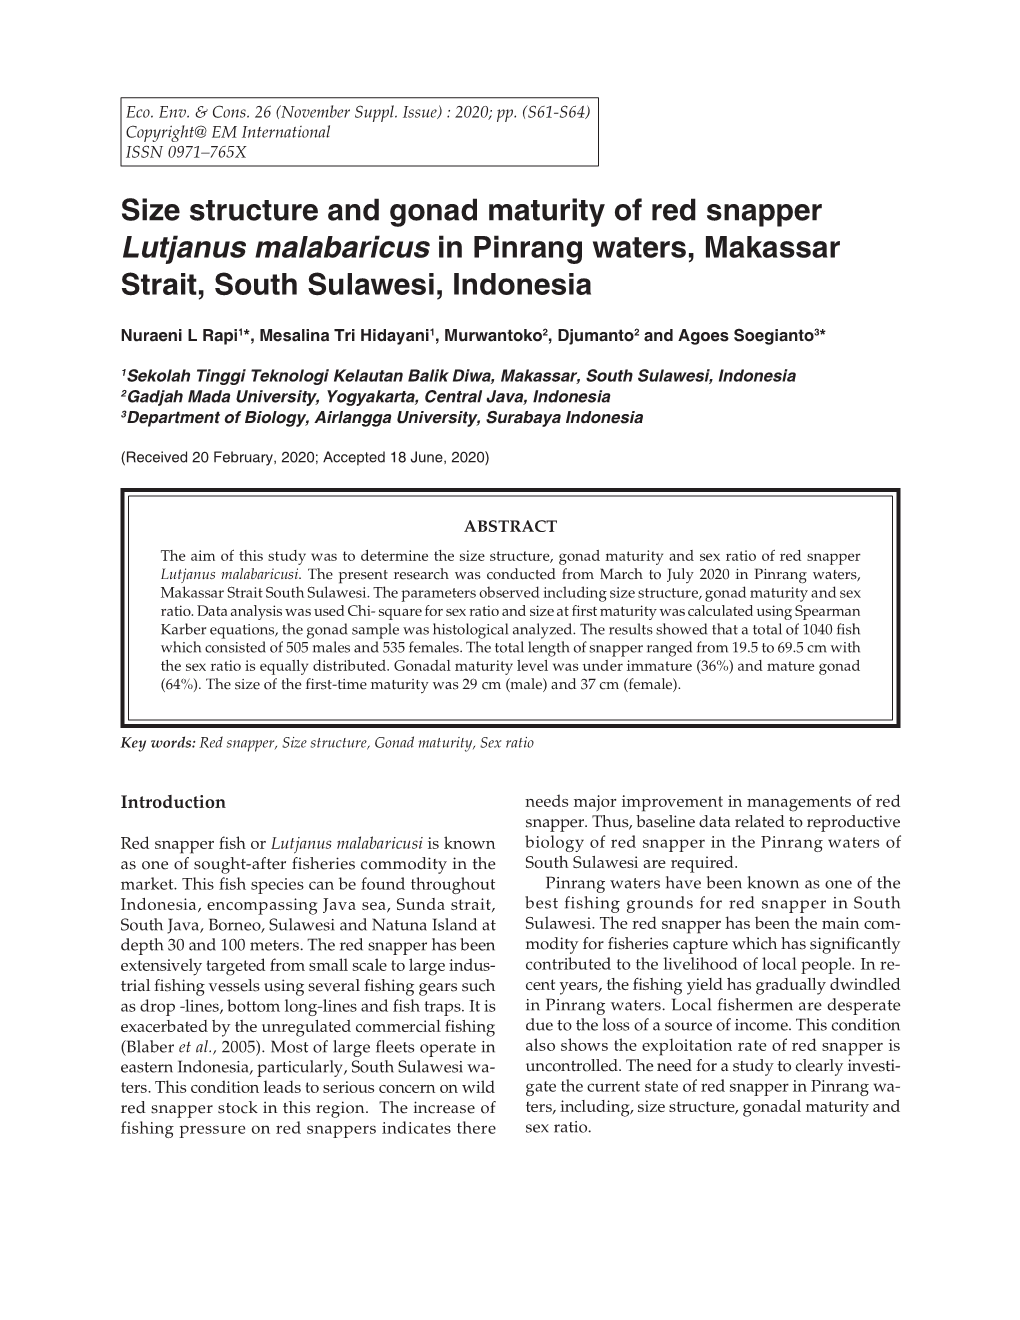 Size Structure and Gonad Maturity of Red Snapper Lutjanus Malabaricus in Pinrang Waters, Makassar Strait, South Sulawesi, Indonesia